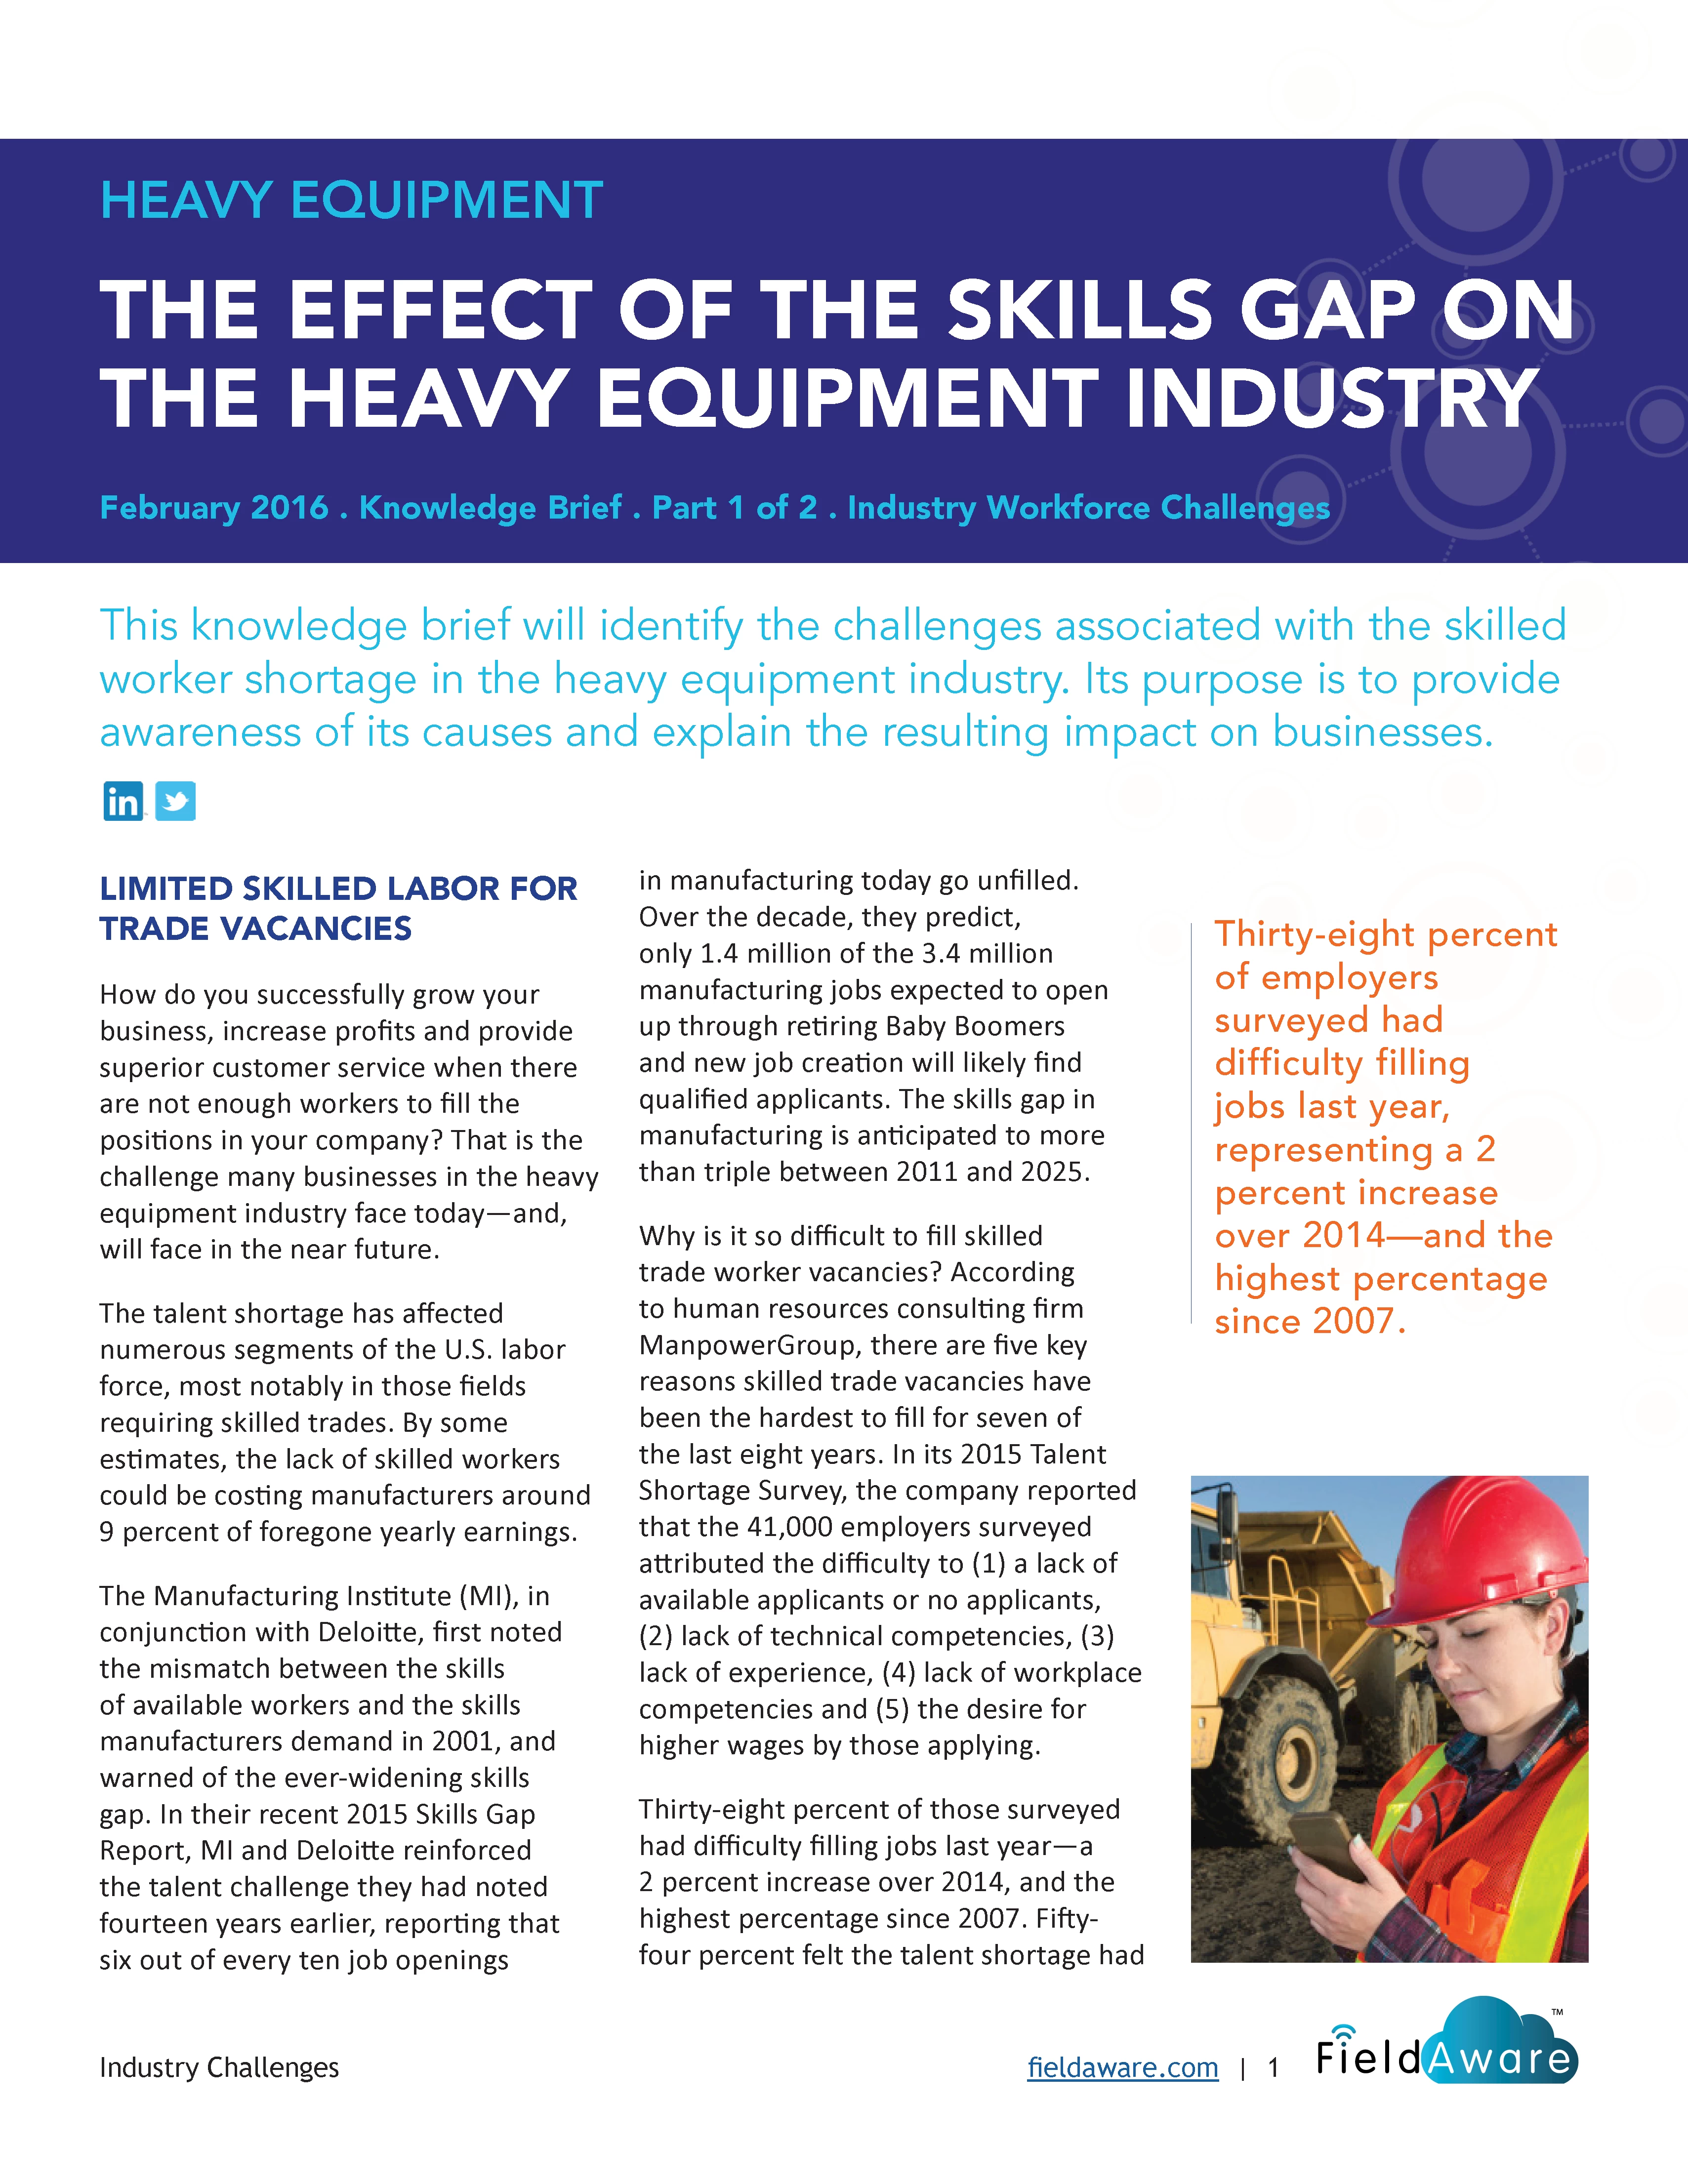 The Effect Of The Skills Gap On The Heavy Equipment Industry - Part 1 White Paper